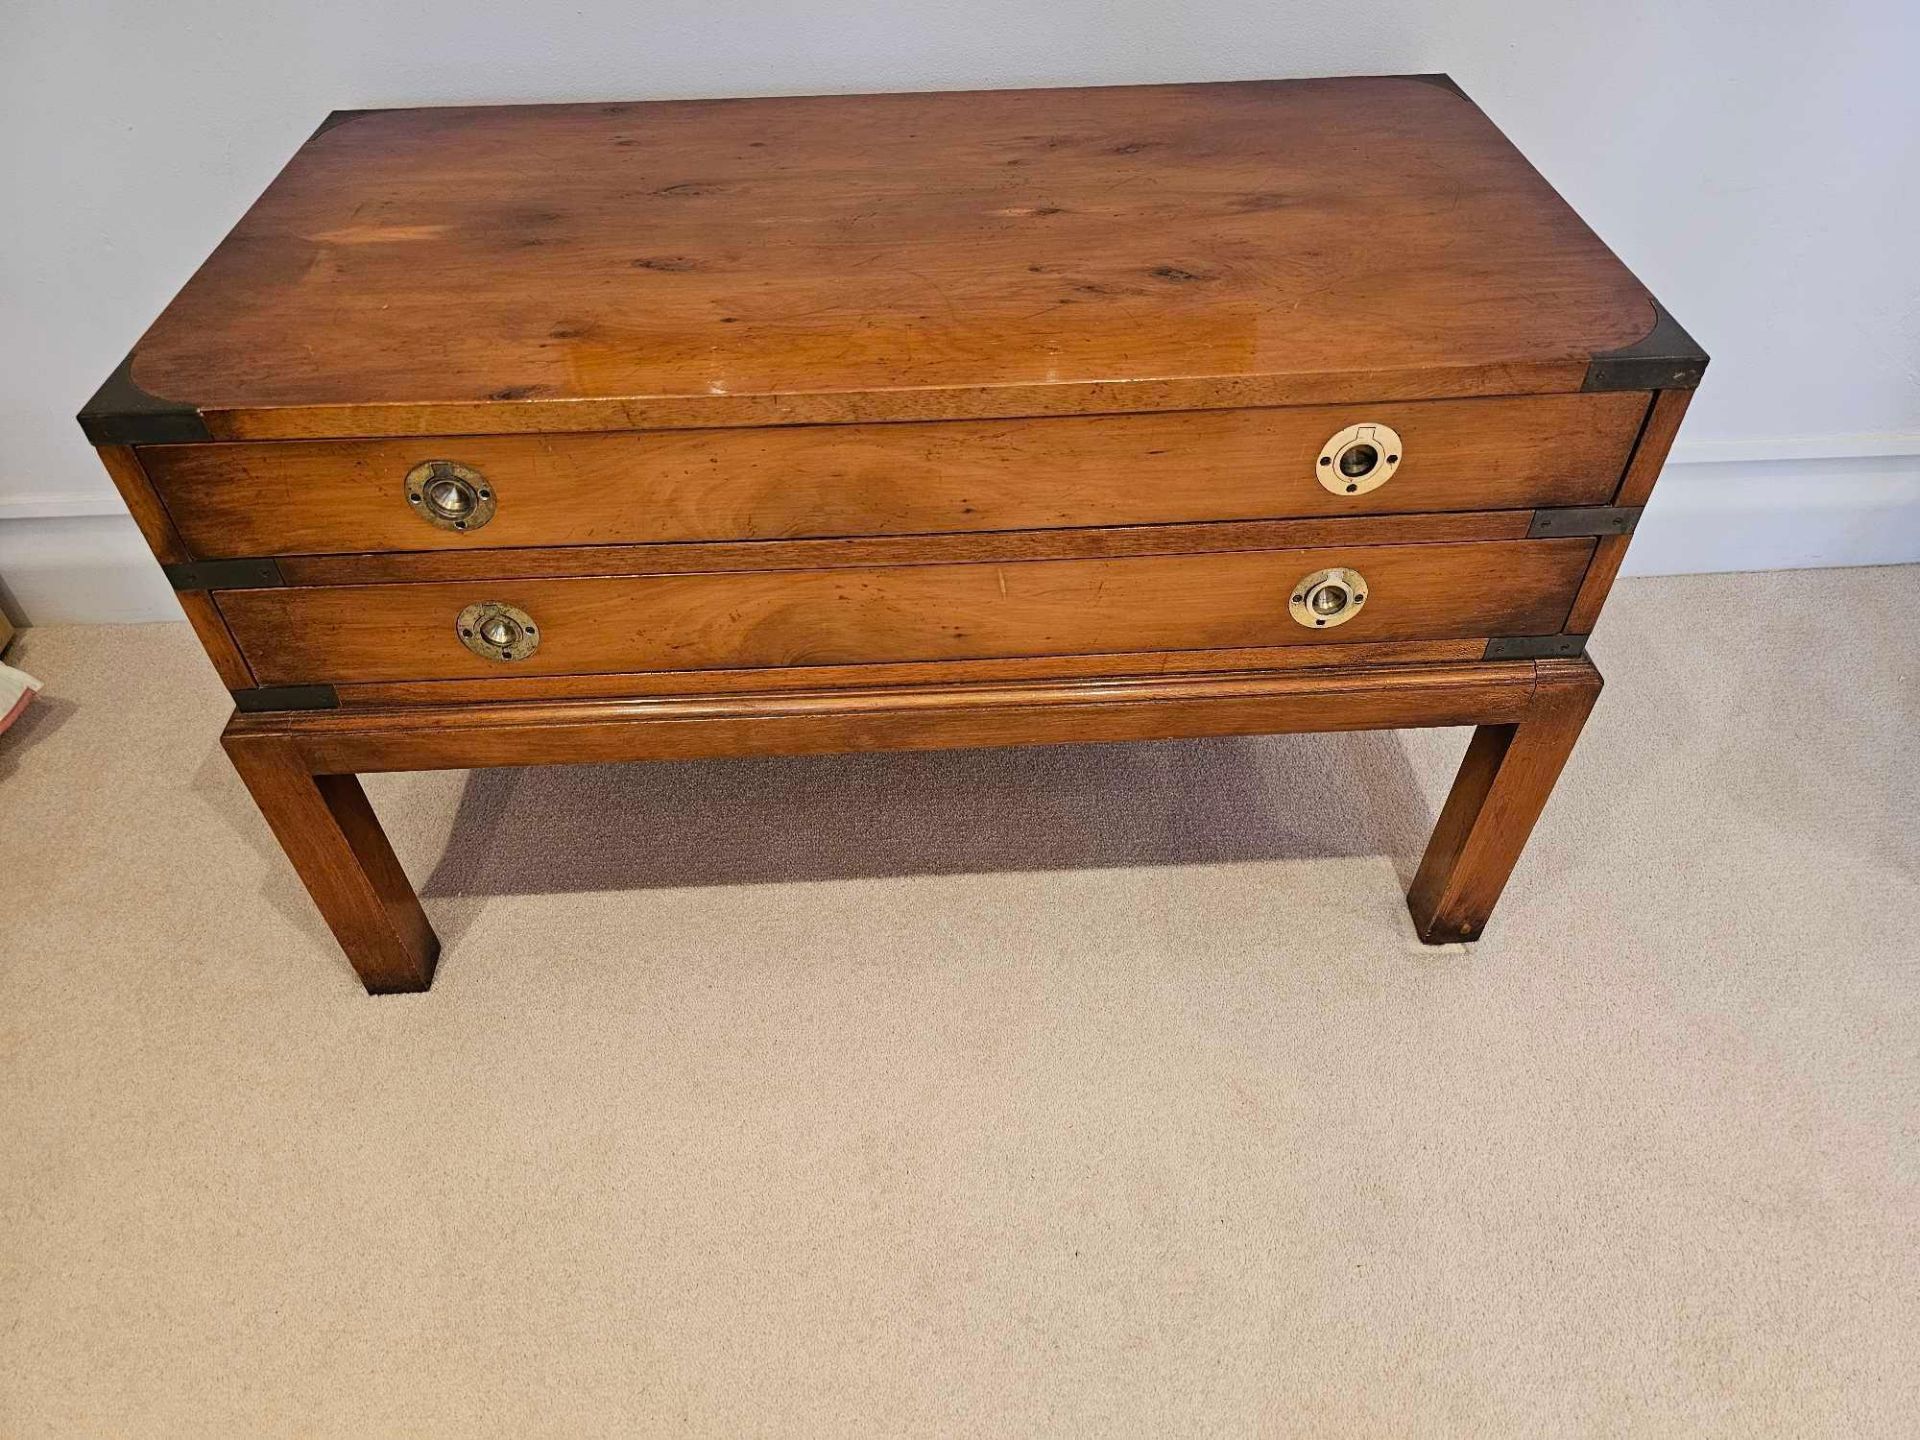 Bradley Furniture Burr Yew Wood And Brass Military Campaign Chest 84 X 43 X 50cm - Image 2 of 5